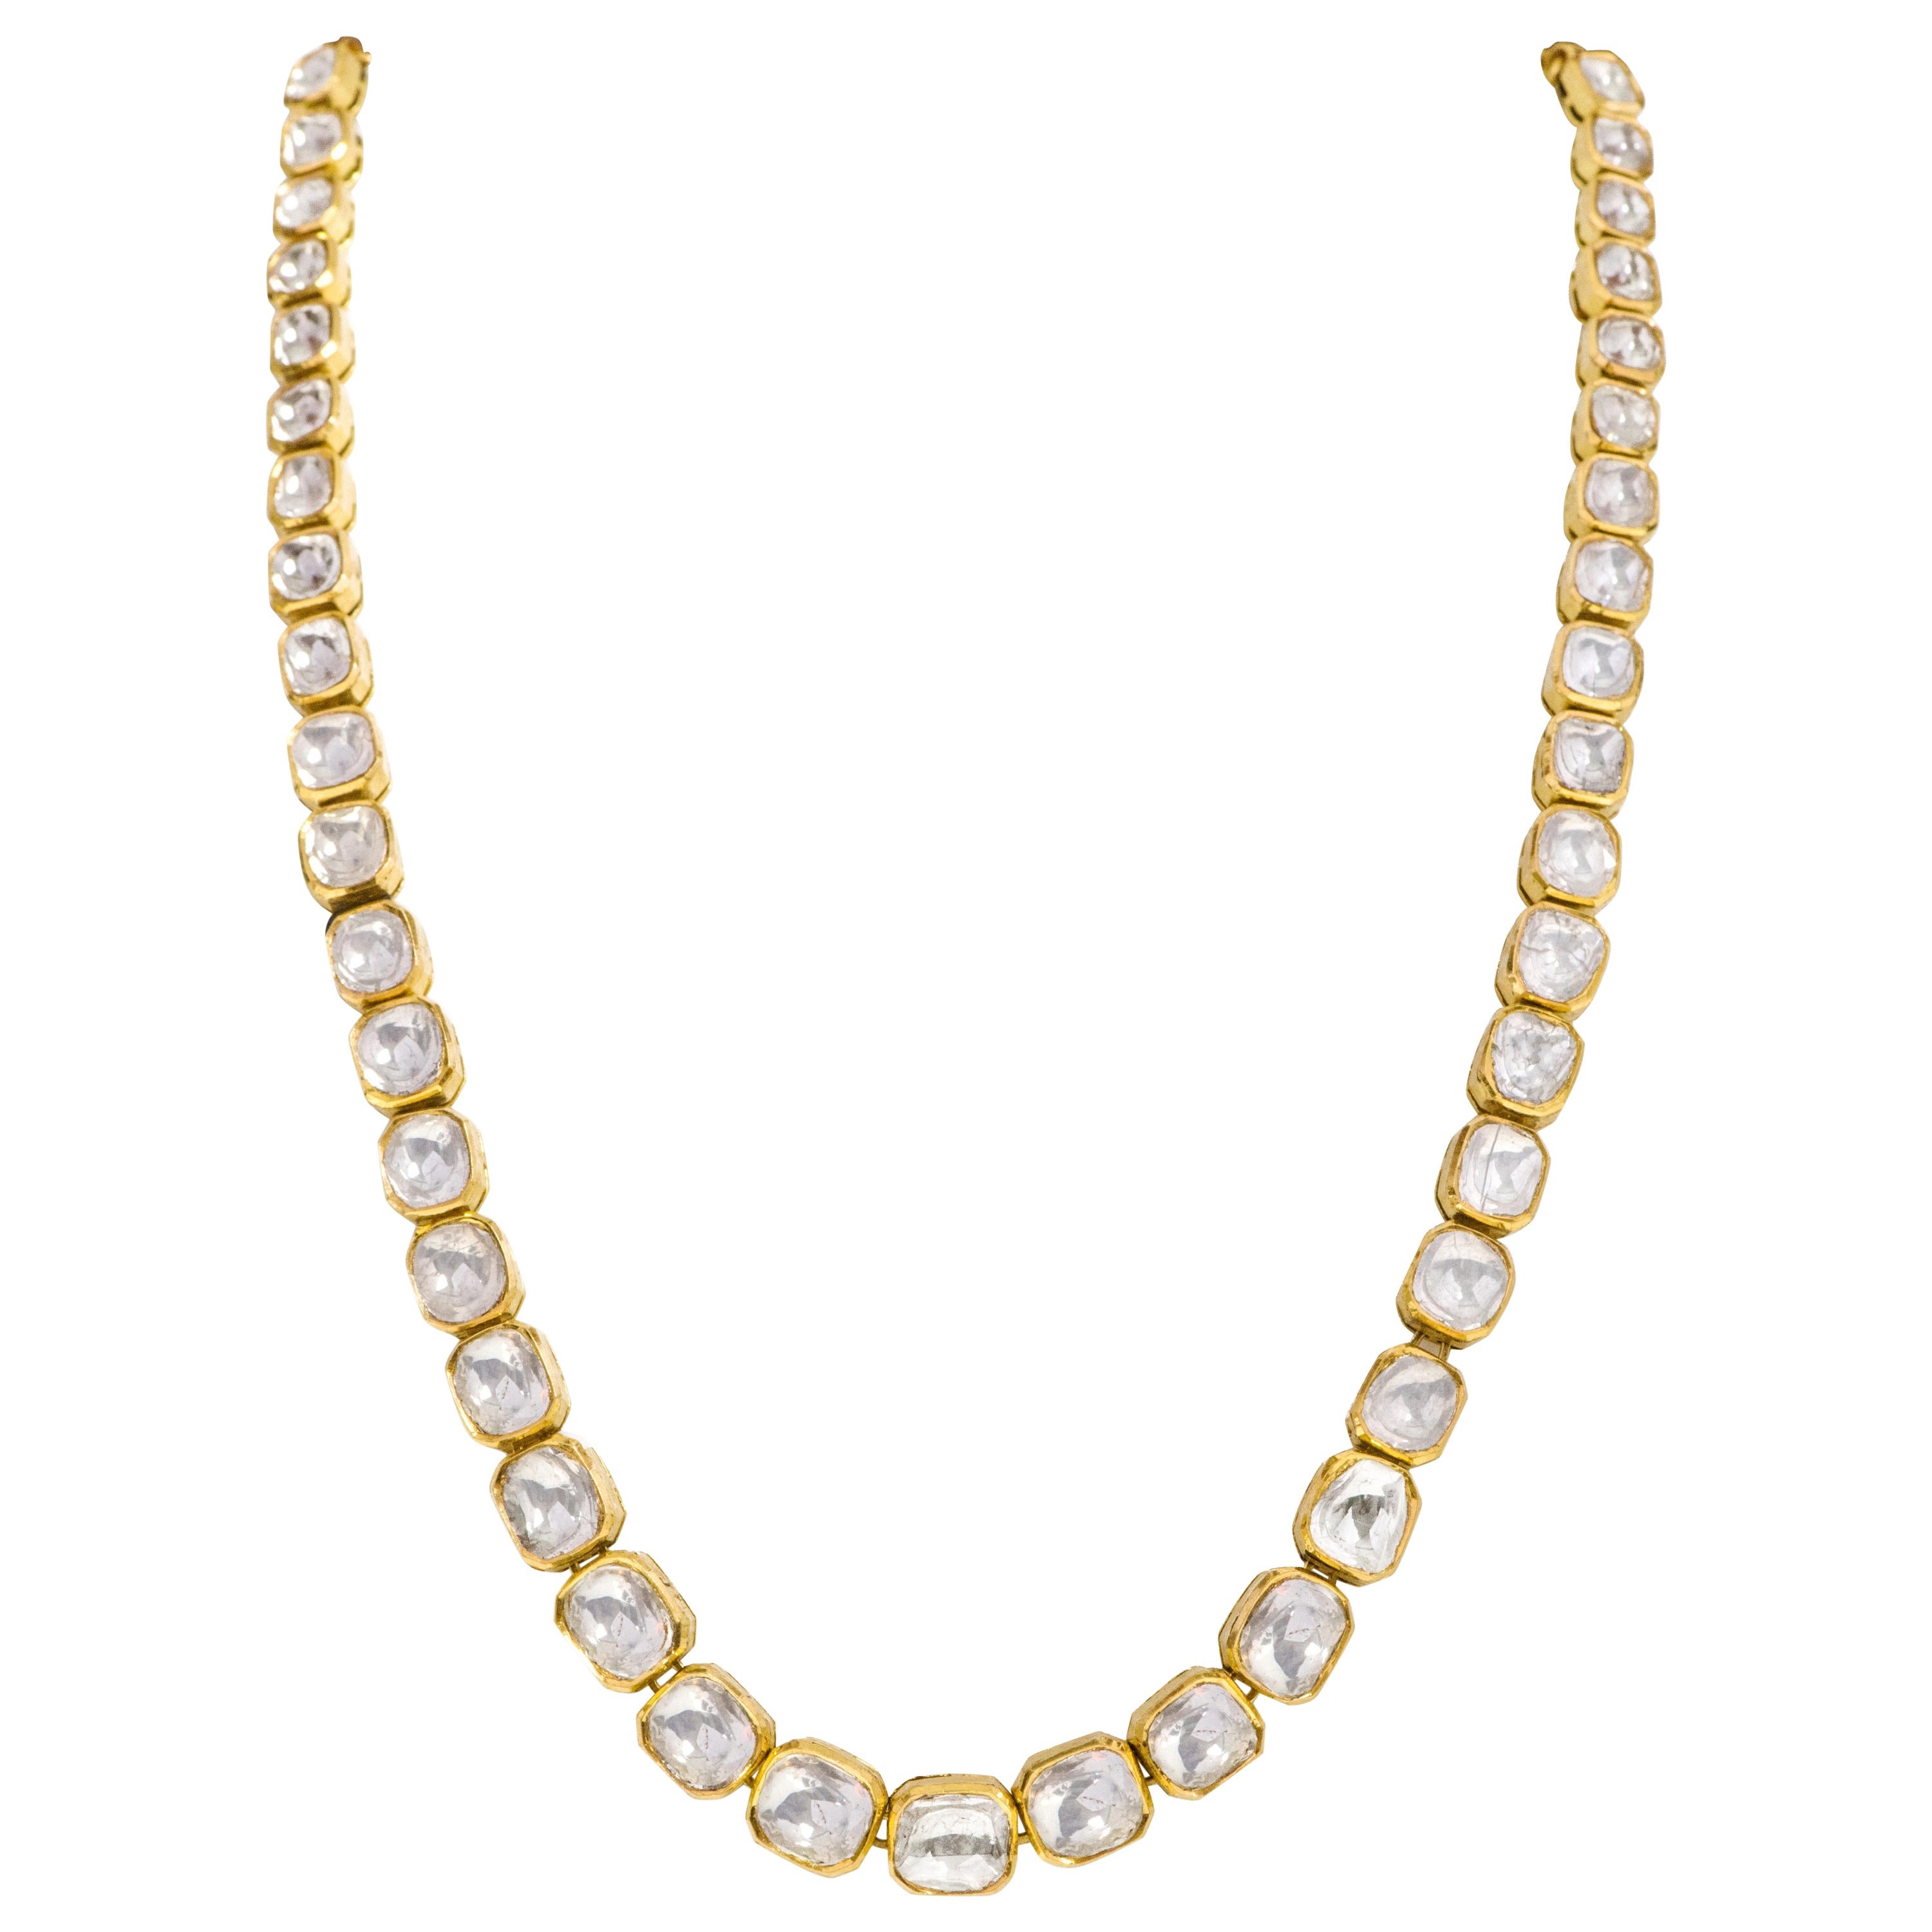 18 Karat Gold 14.13 Carats Diamond Necklace Handcrafted with Multi-Color Enamel For Sale